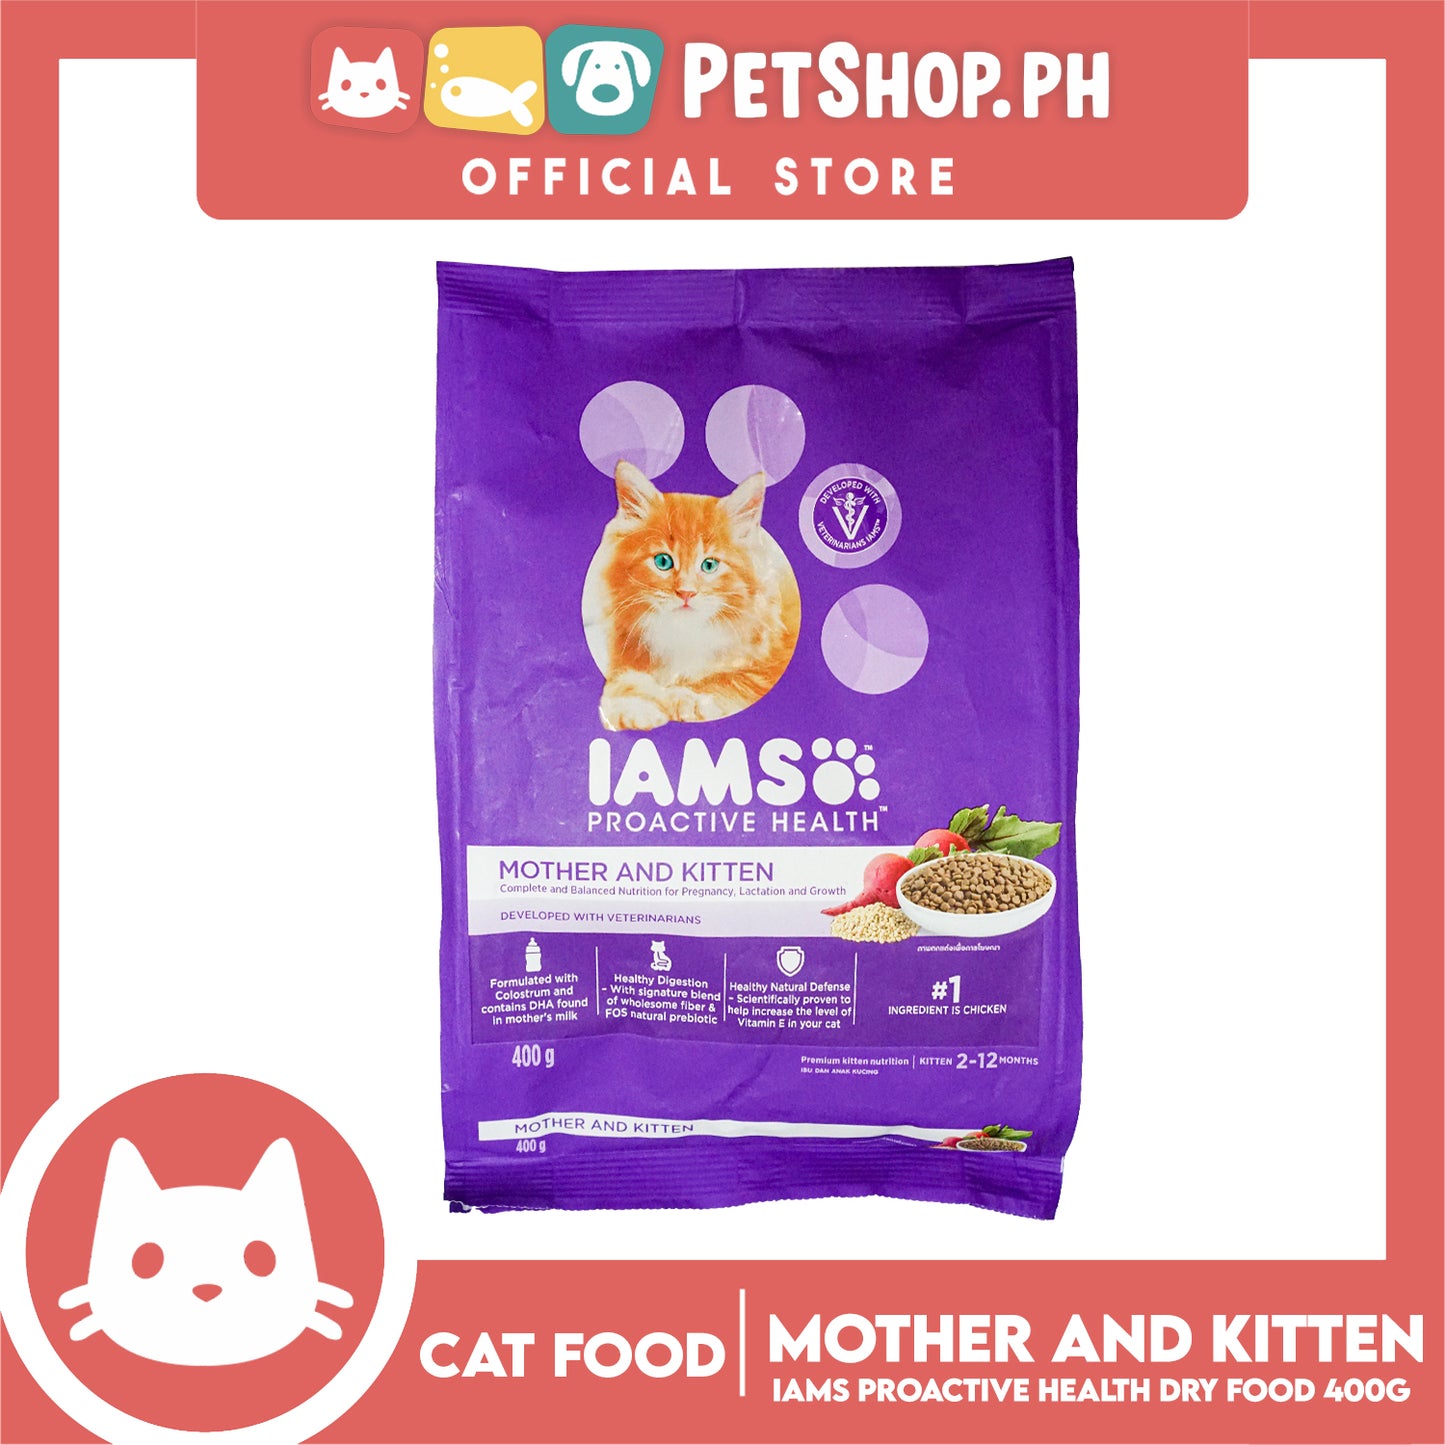 IAMS Proactive Health Mother and Kitten 400g for 2-12 months Dry Cat Food